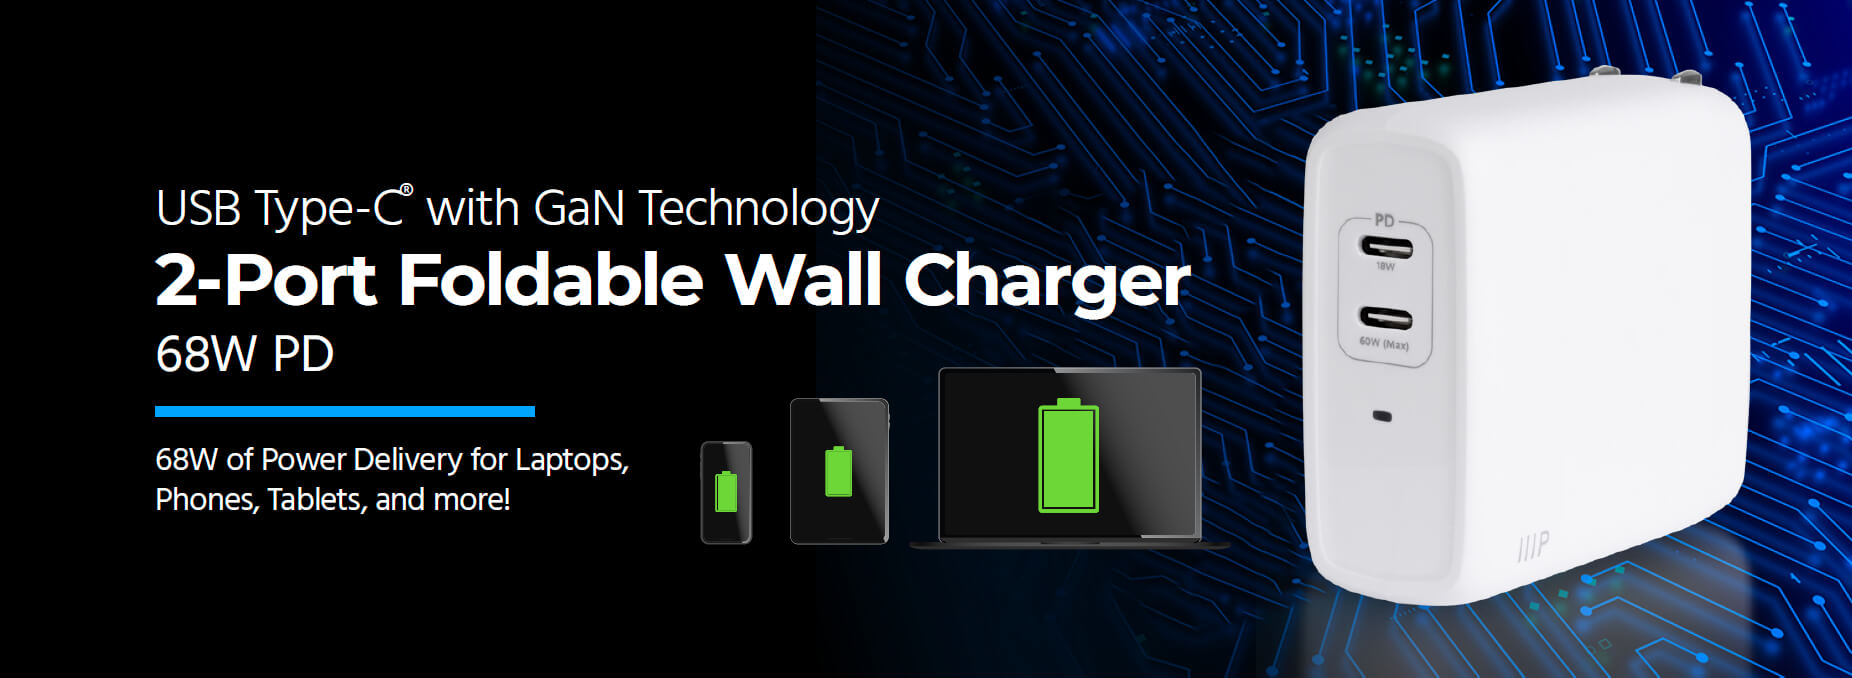 Basics 68W Two-Port GaN Wall Charger Overview 